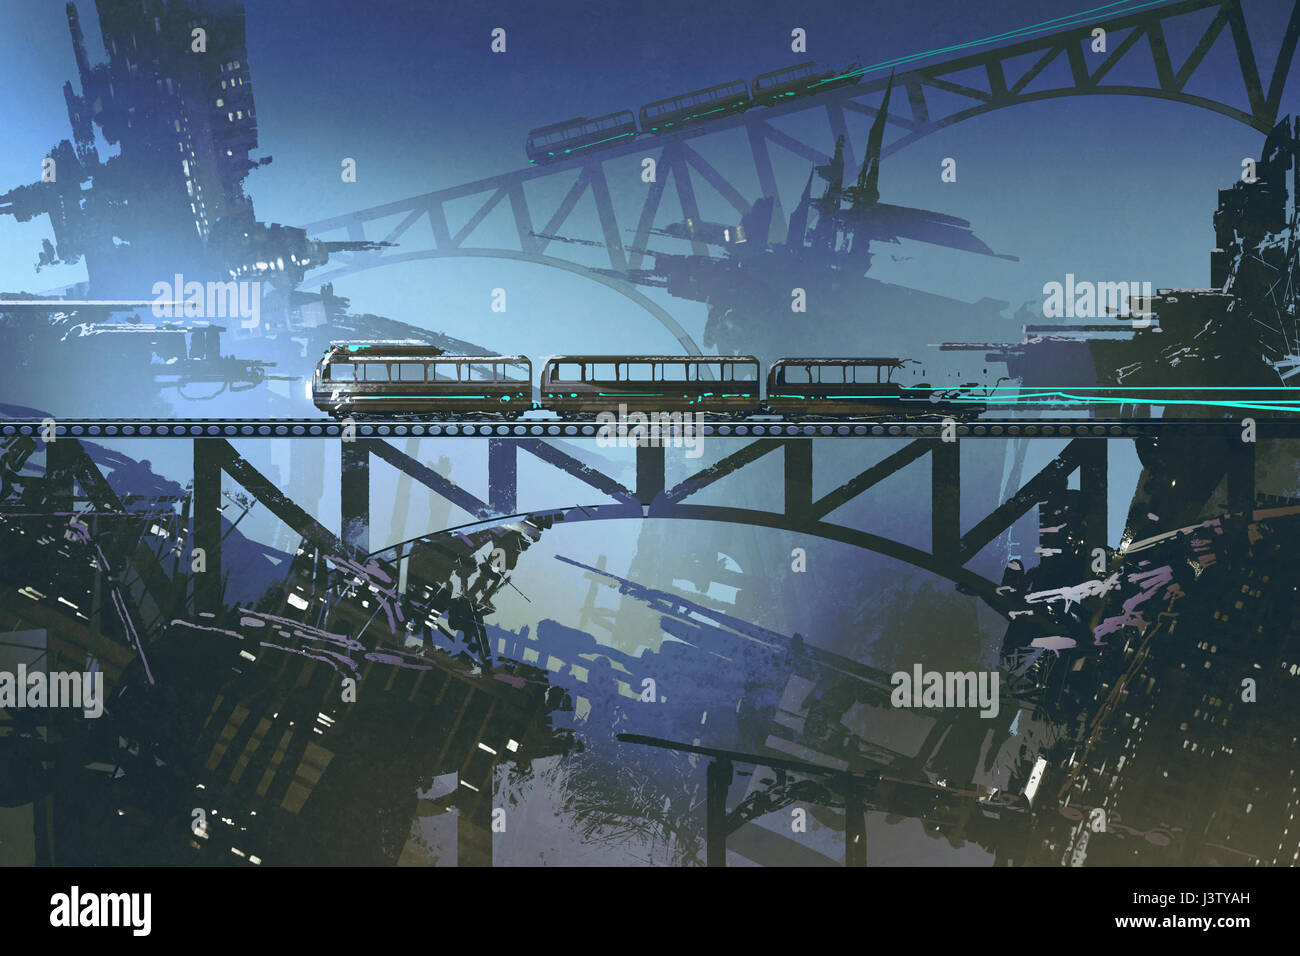 scene of futuristic train on railway and bridge in abandoned city with digital art style, illustration painting Stock Photo